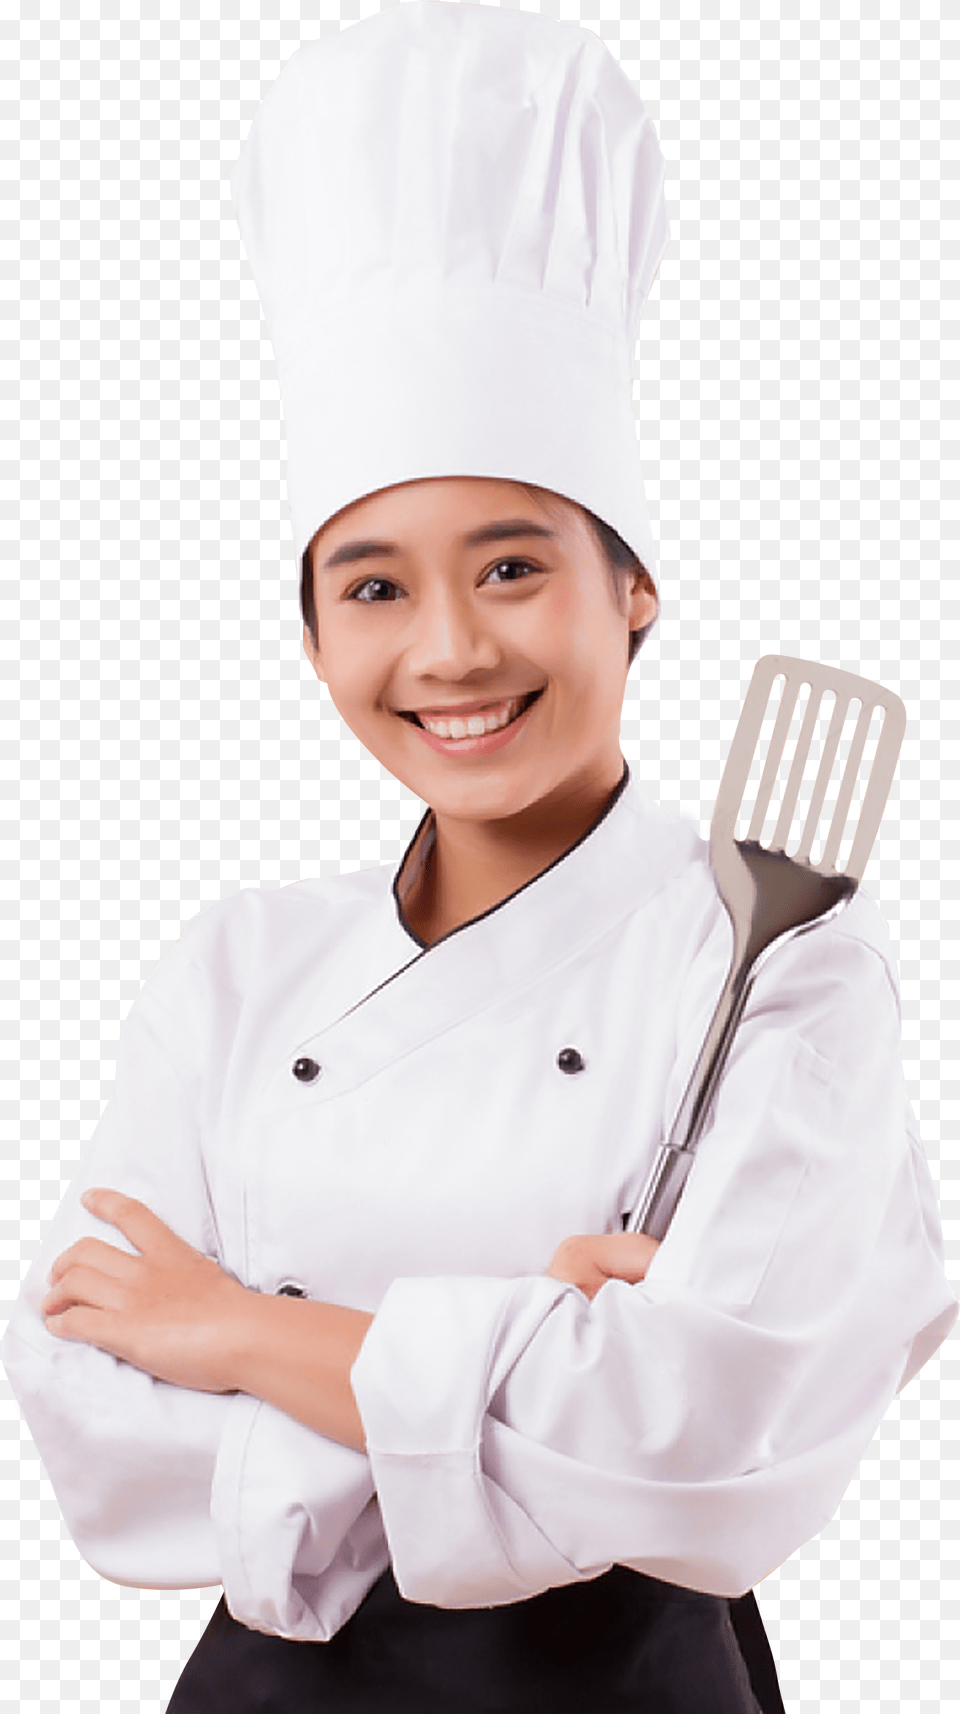 Chef Holding Spatula Free, Kitchen Utensil, Adult, Female, Person Png